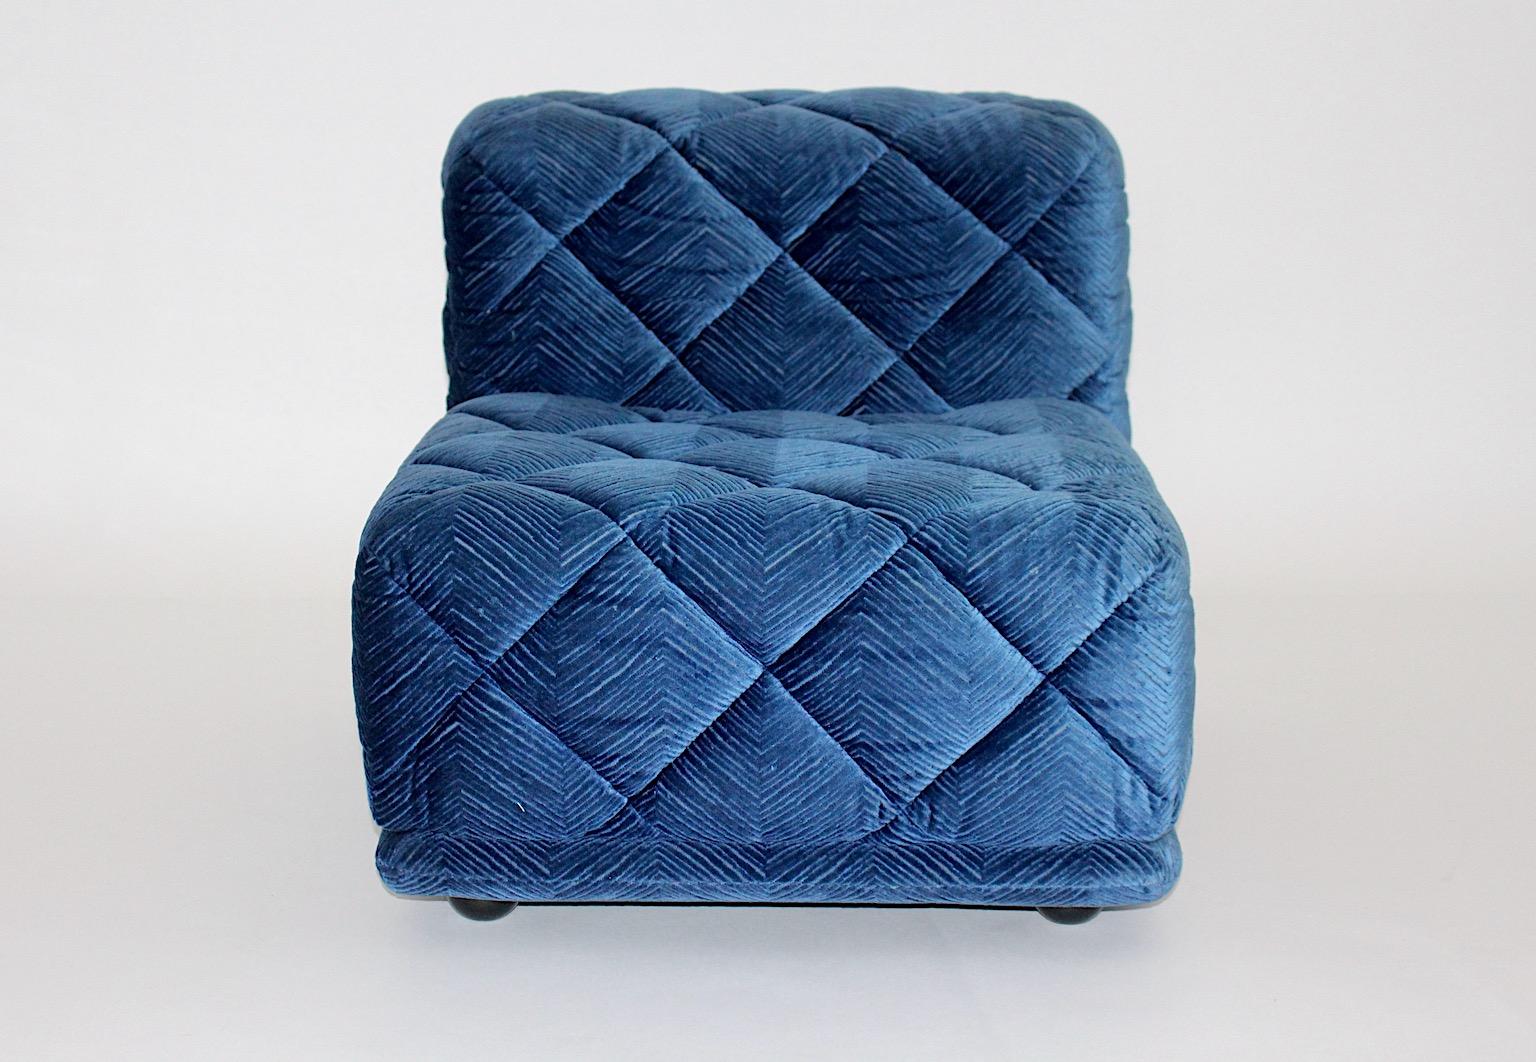 Modular Space Age Vintage Blue Velvet Lounge Chair Rhombos Wittmann 1970 Austria In Good Condition For Sale In Vienna, AT